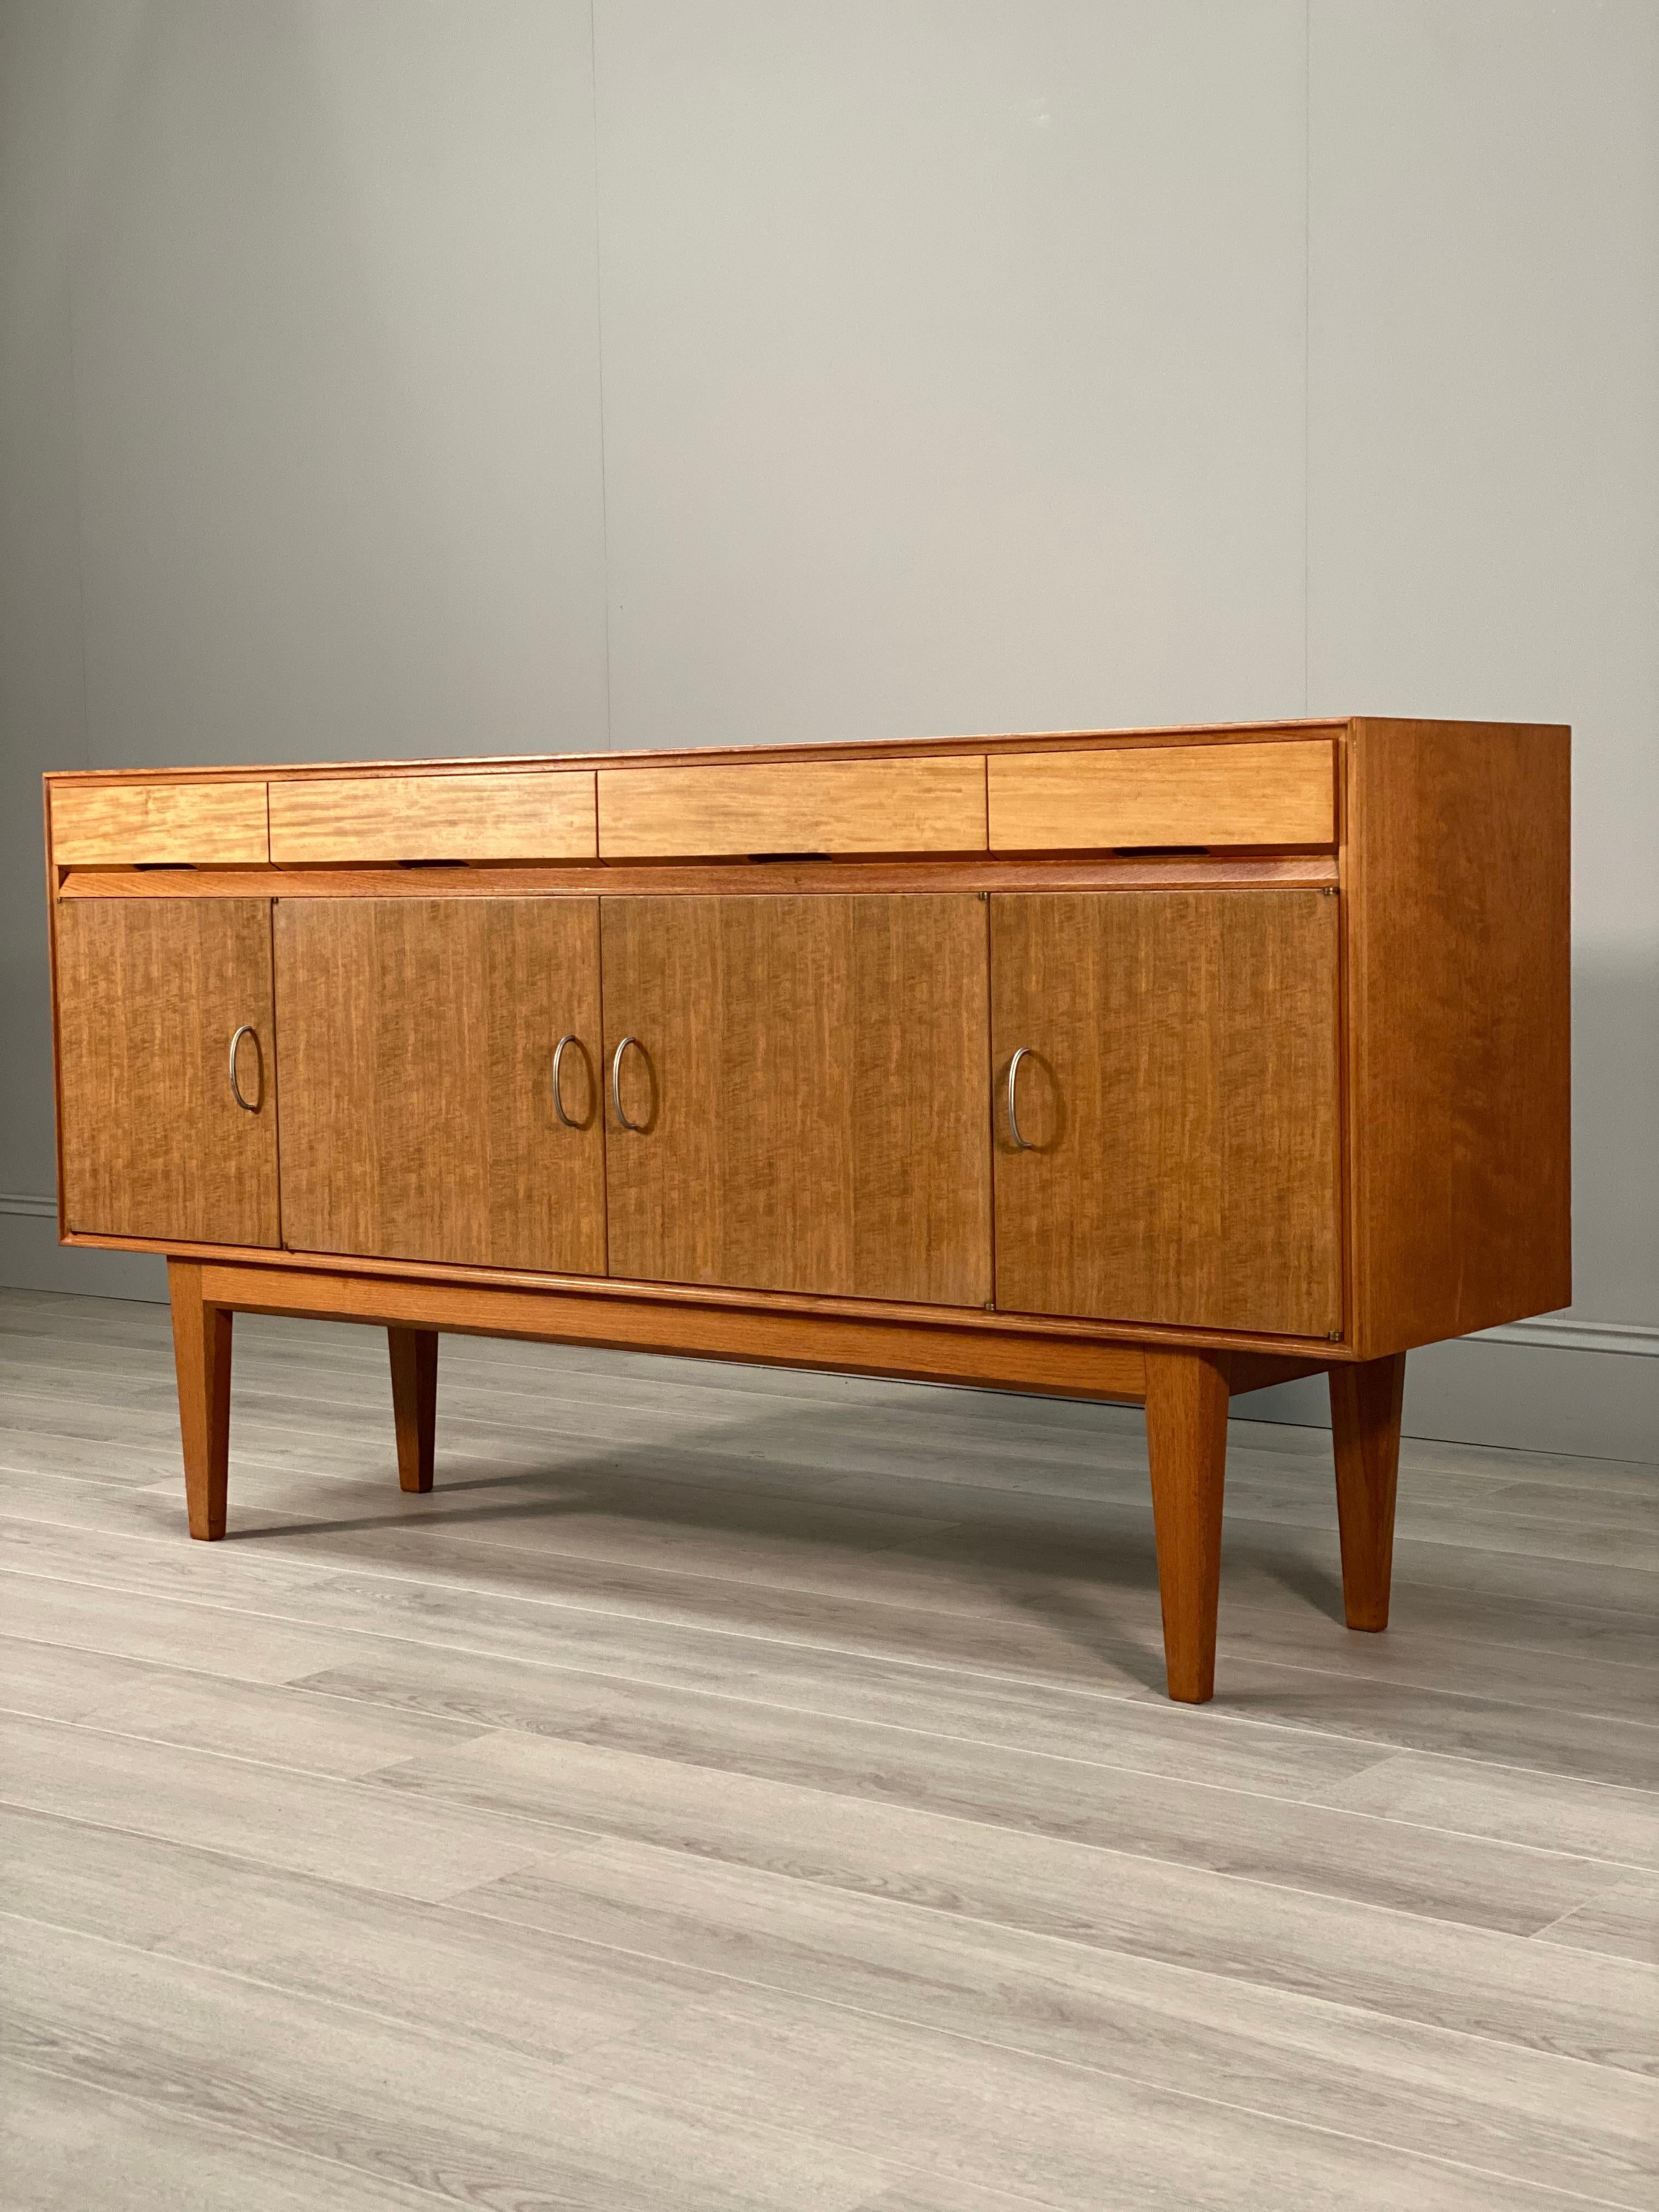 Rare Gordon Russell Sideboard By WH Curly Russell c.1958 For Sale 1